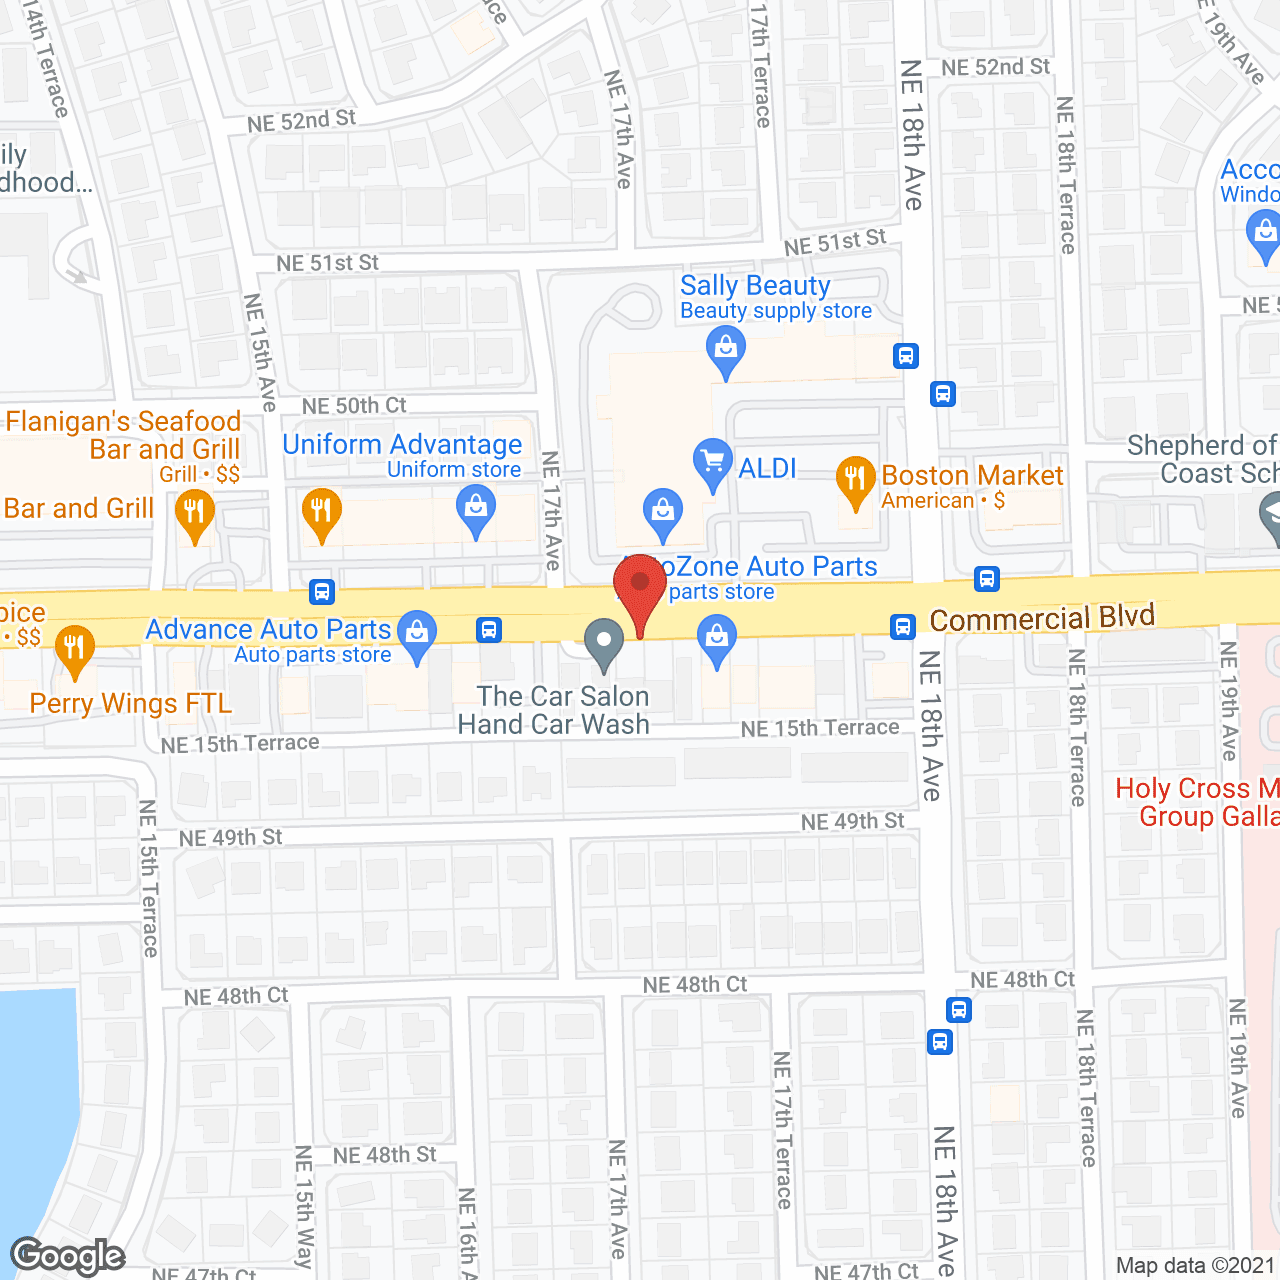 Fort Lauderdale Health Ctr in google map